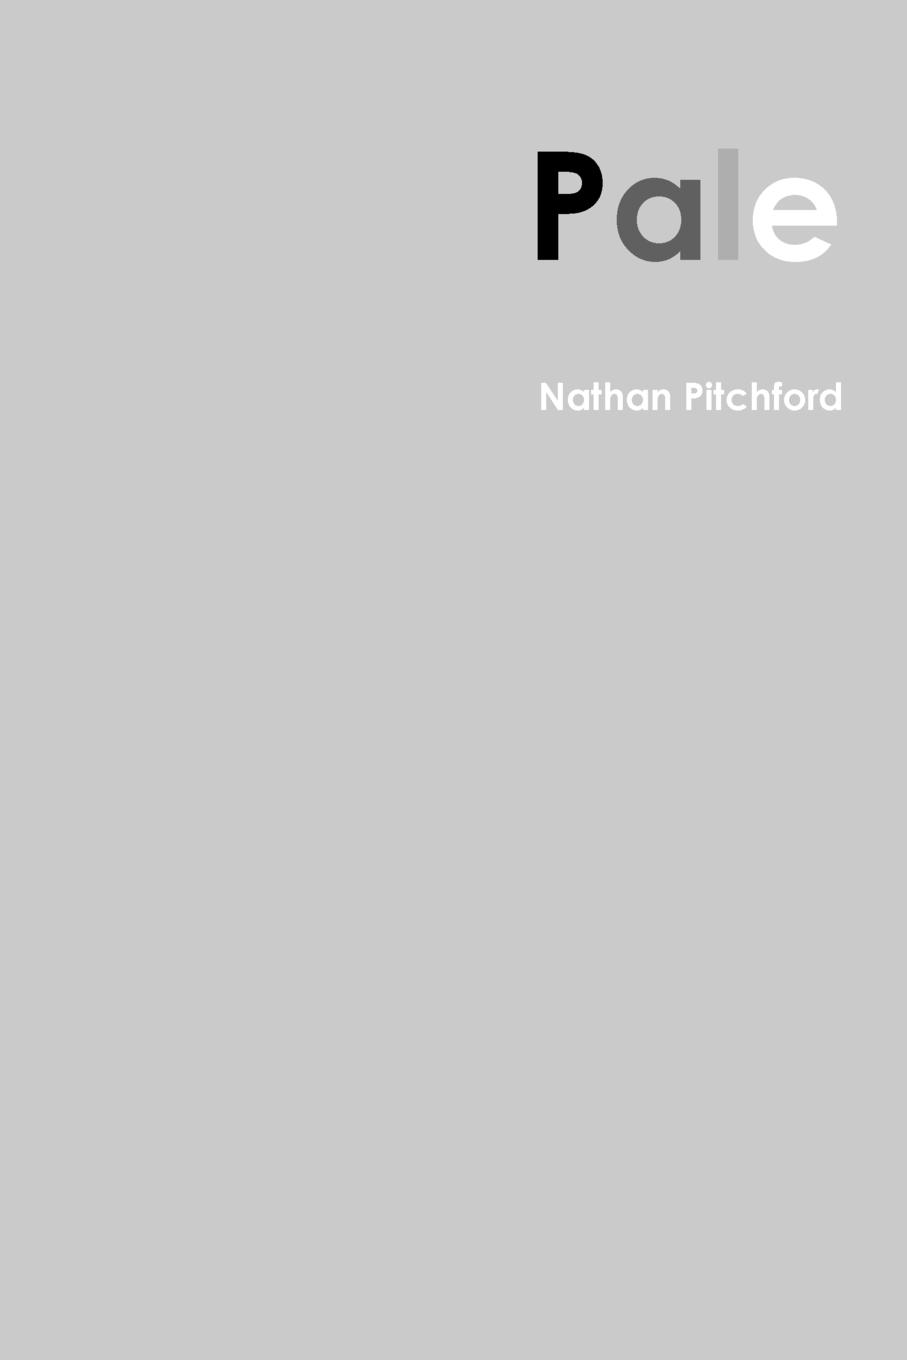 Nathan Pitchford Pale